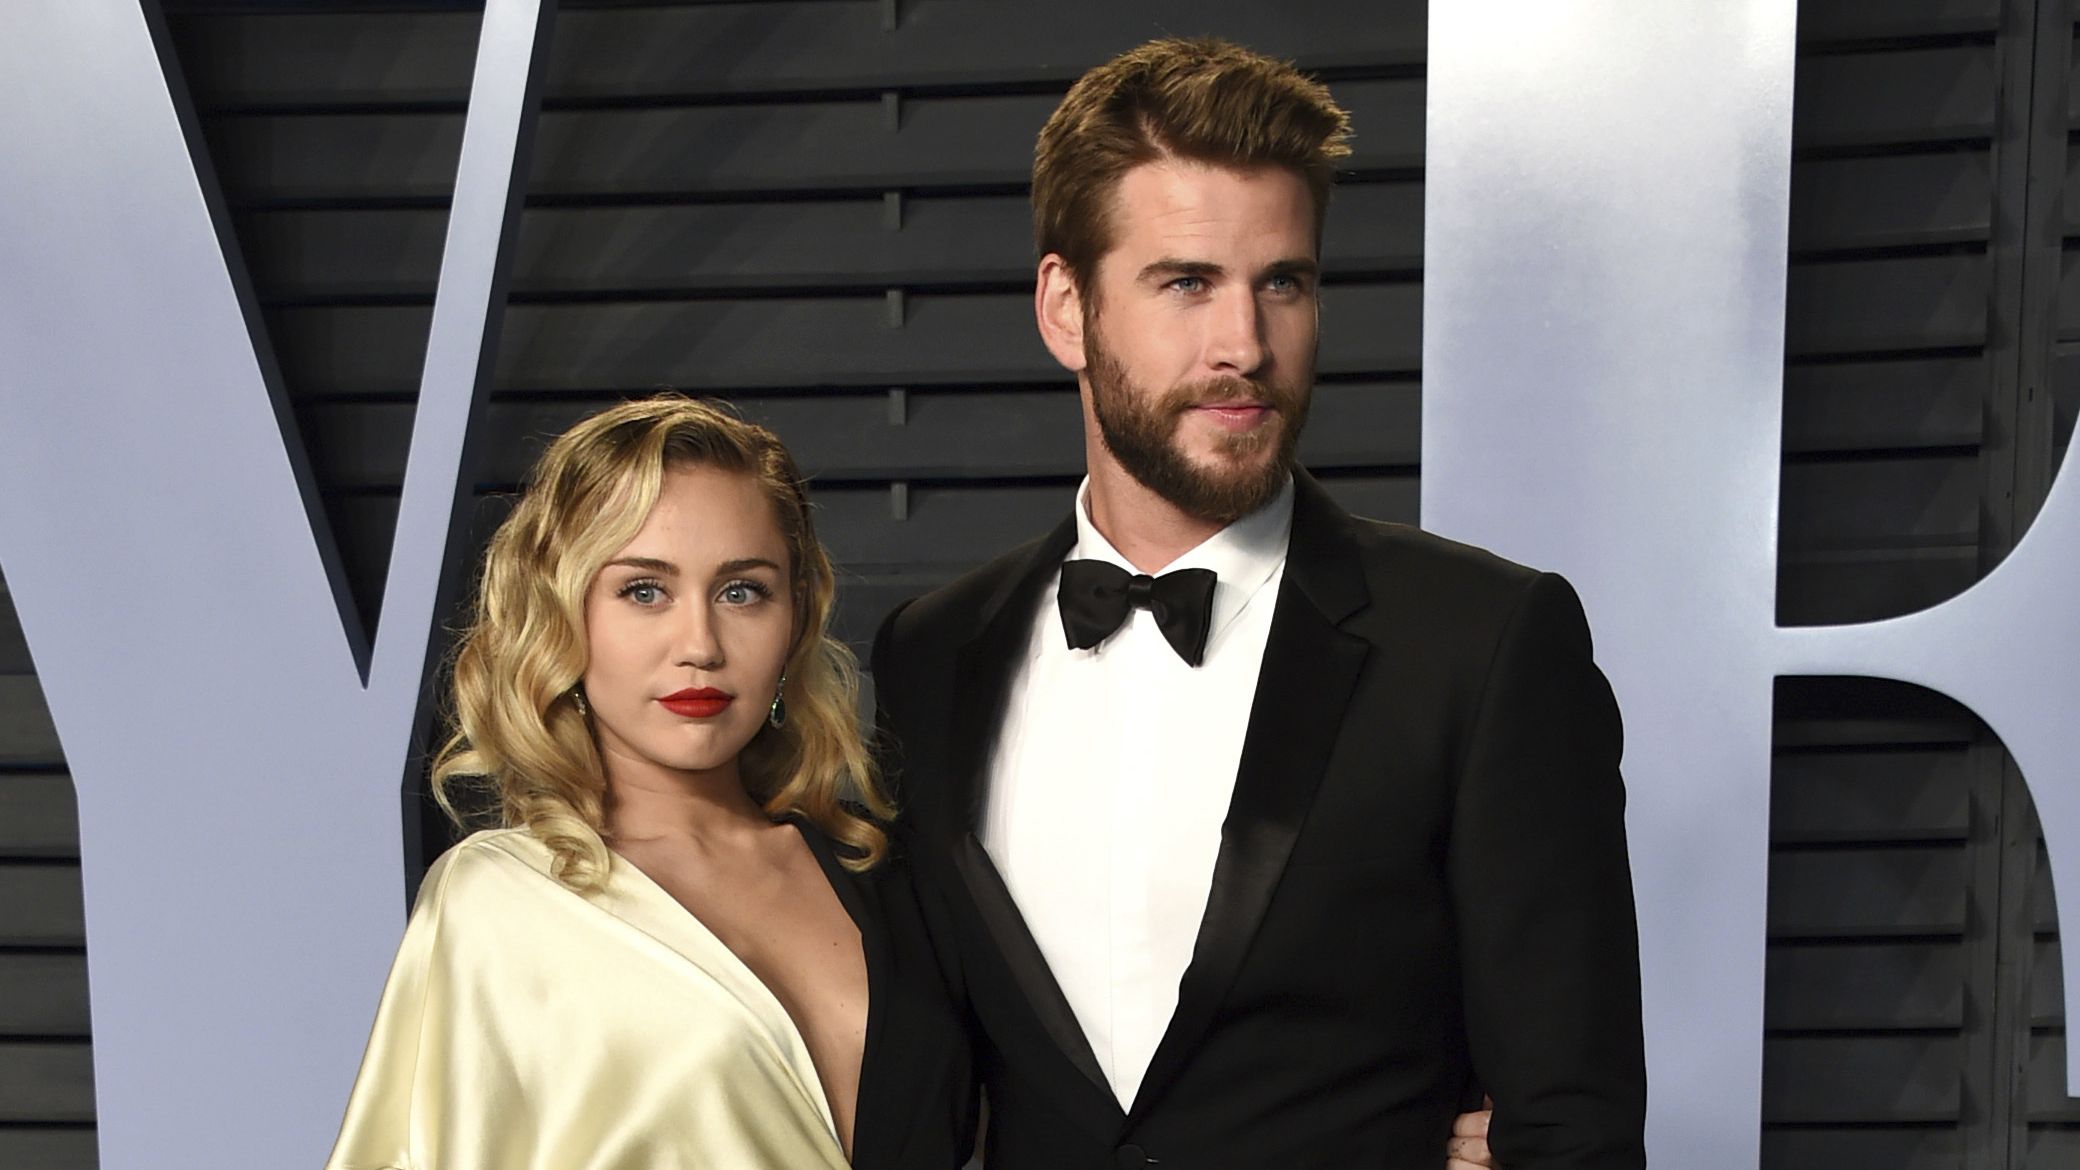 Liam Hemsworth files for divorce from Miley CyrusÂ  